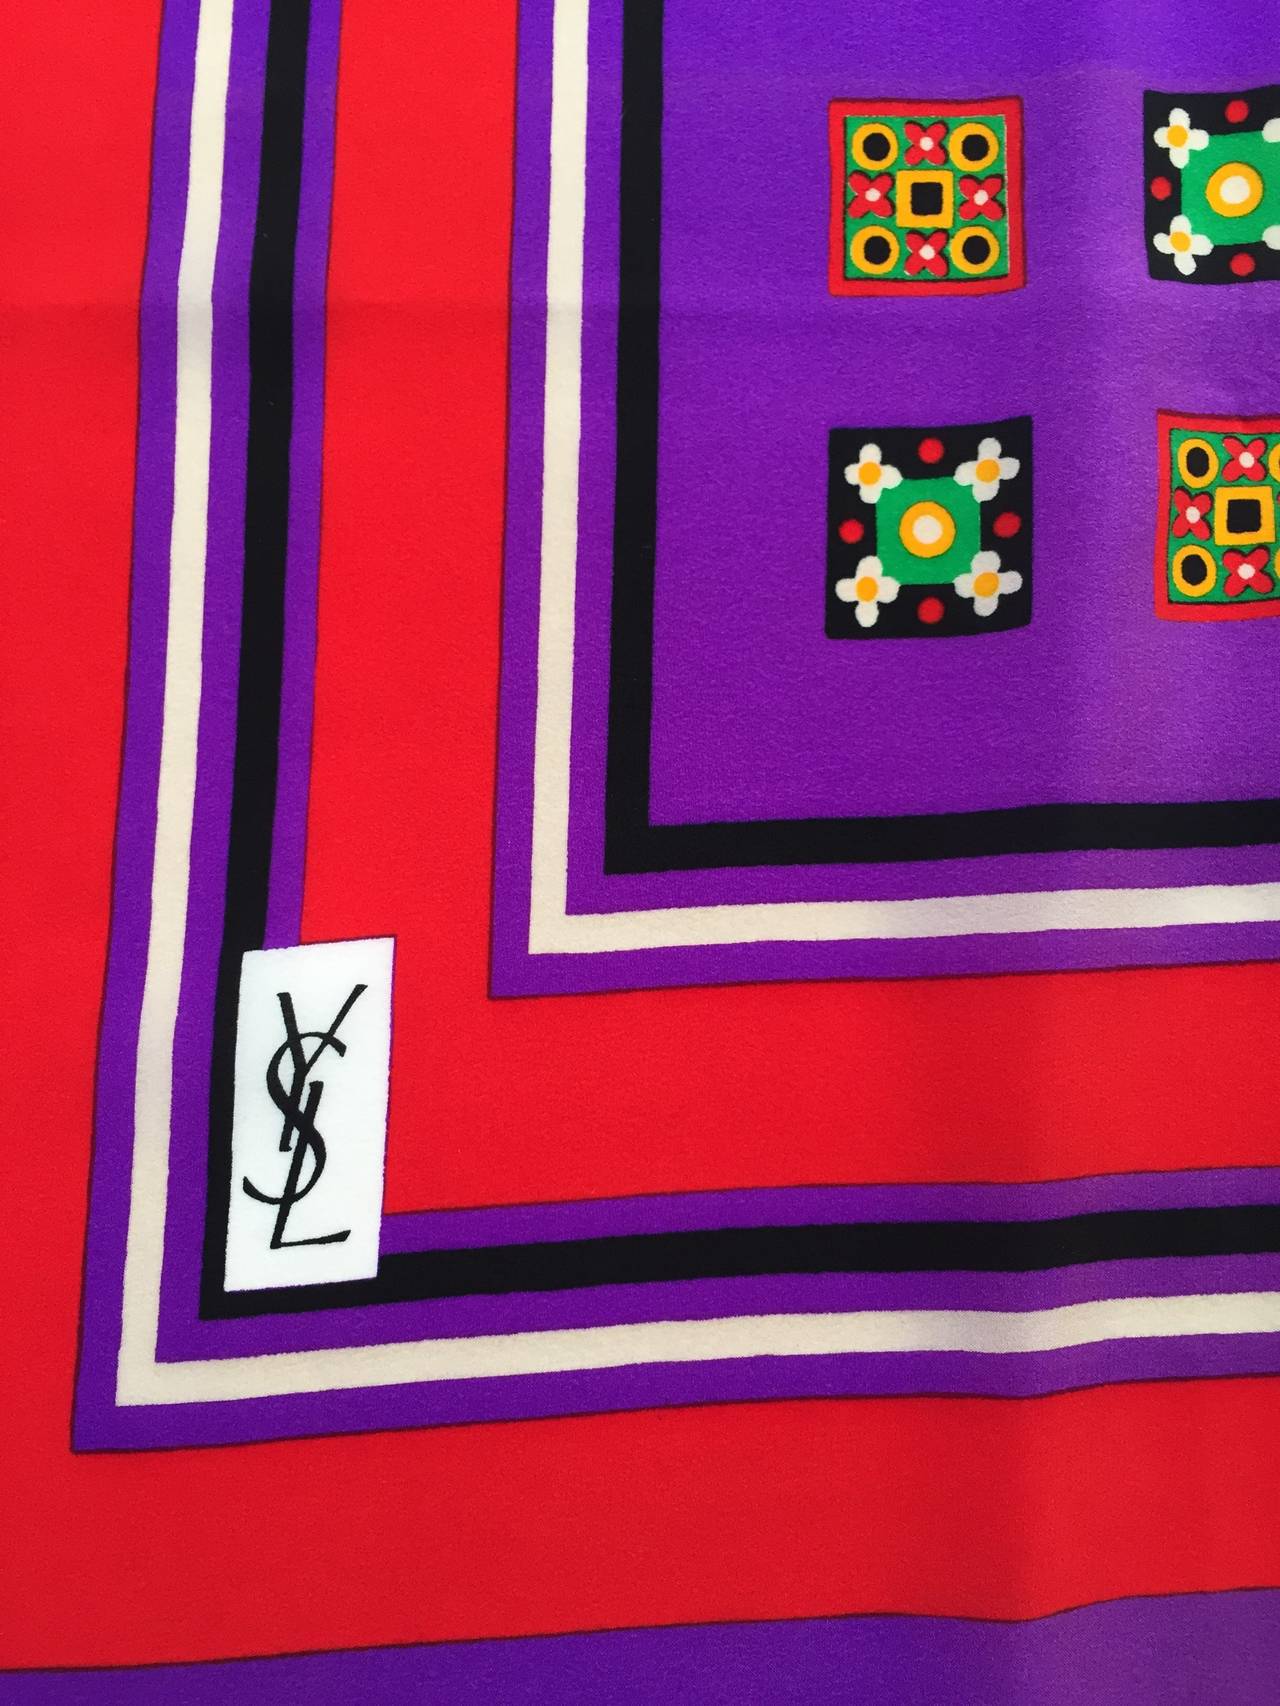 Yves Saint Laurent 1980s silk scarf size 31.5" x 34".
Hand rolled edges.
Red, purple, blue, black, mint green colors all create the most amazing modern design scarf. Perfect for your little black dress to add a splash of panache.